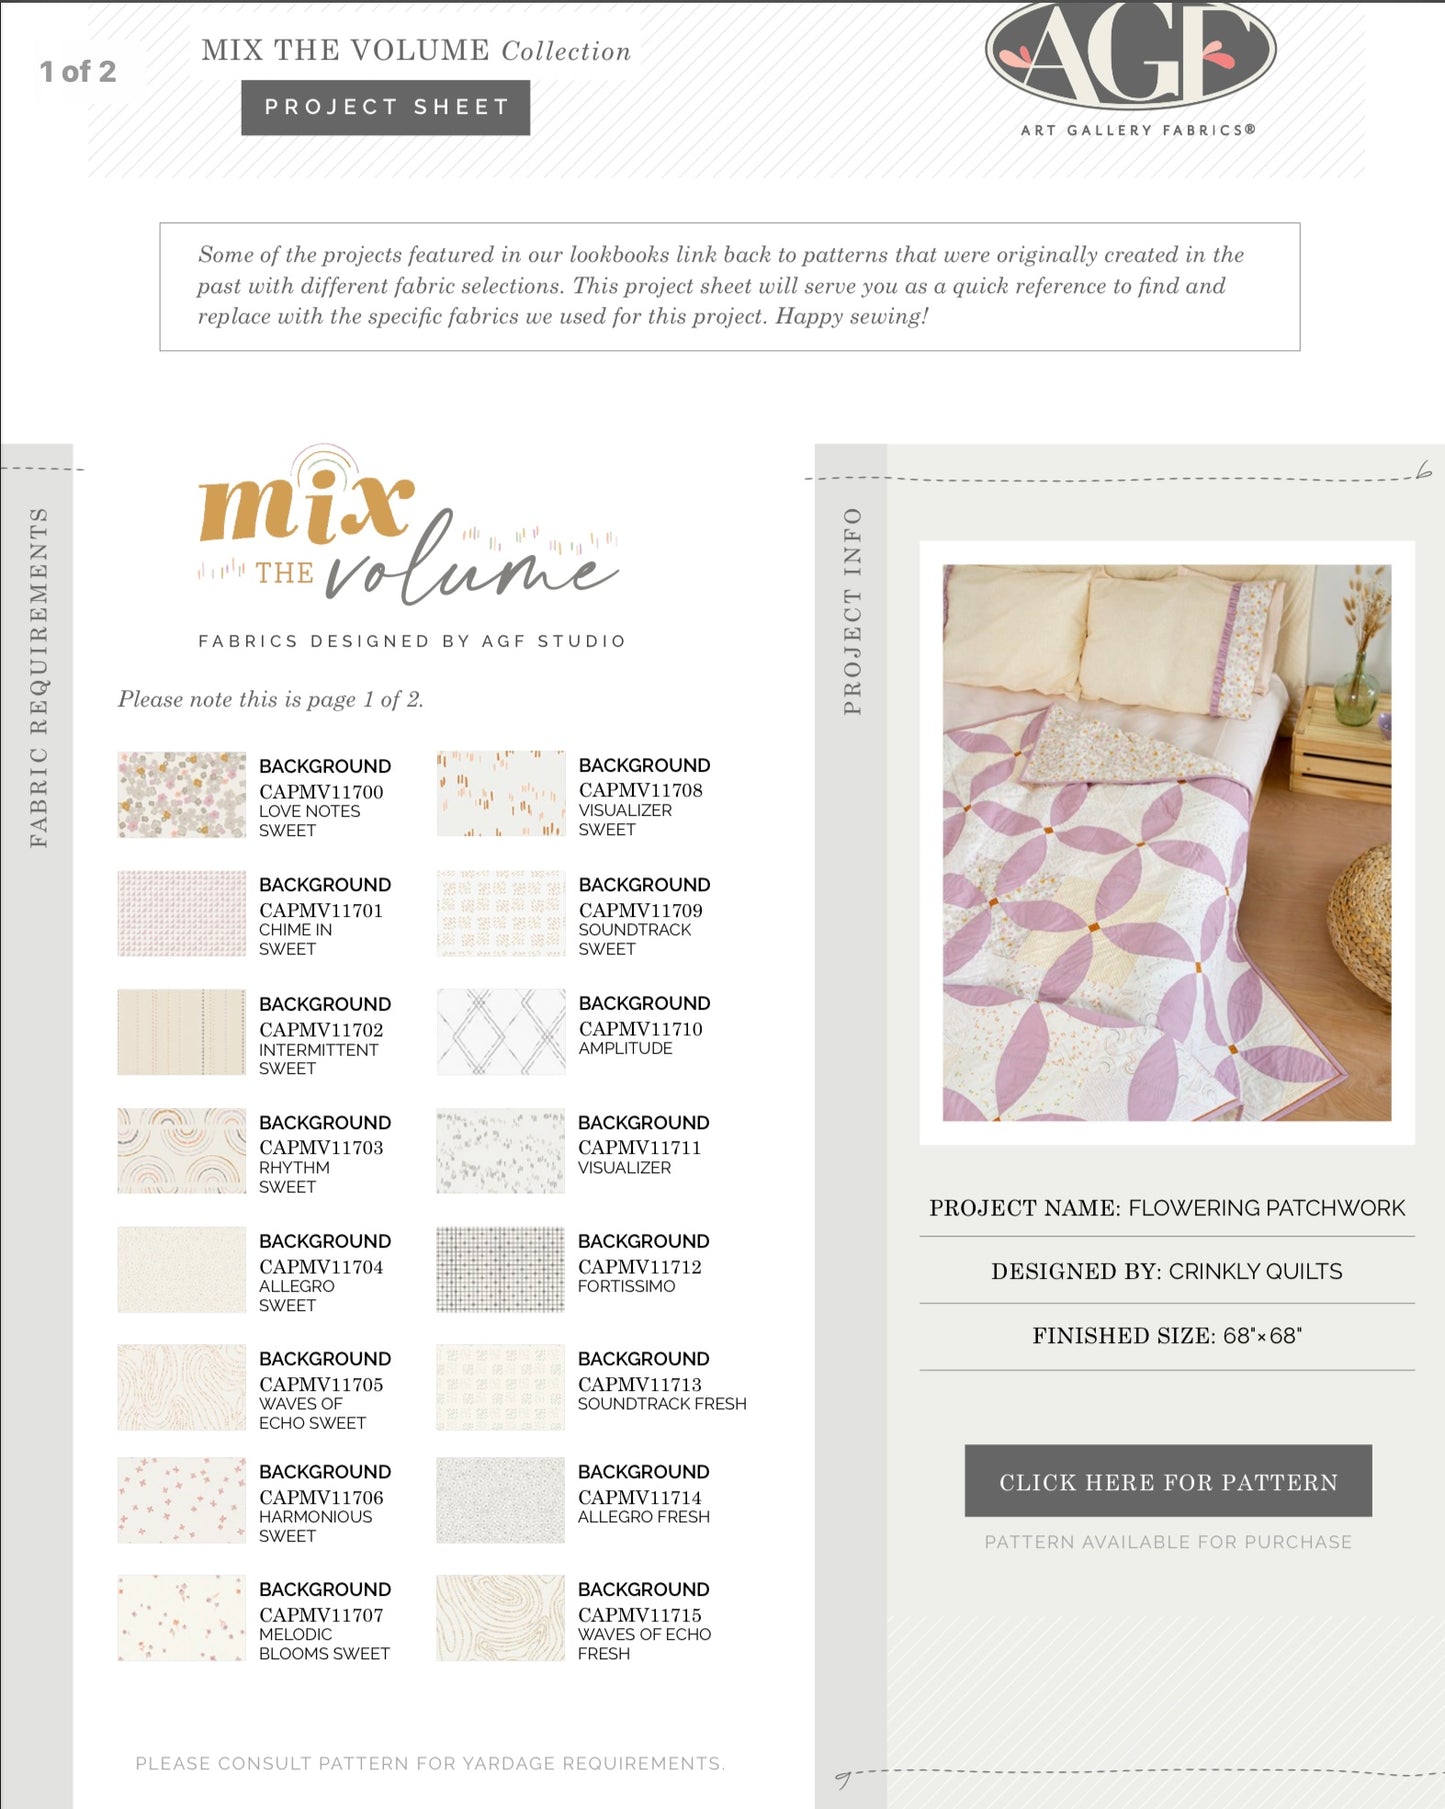 Mix the Volume by AGF Studios : Flowering Patchwork Quilt Kit